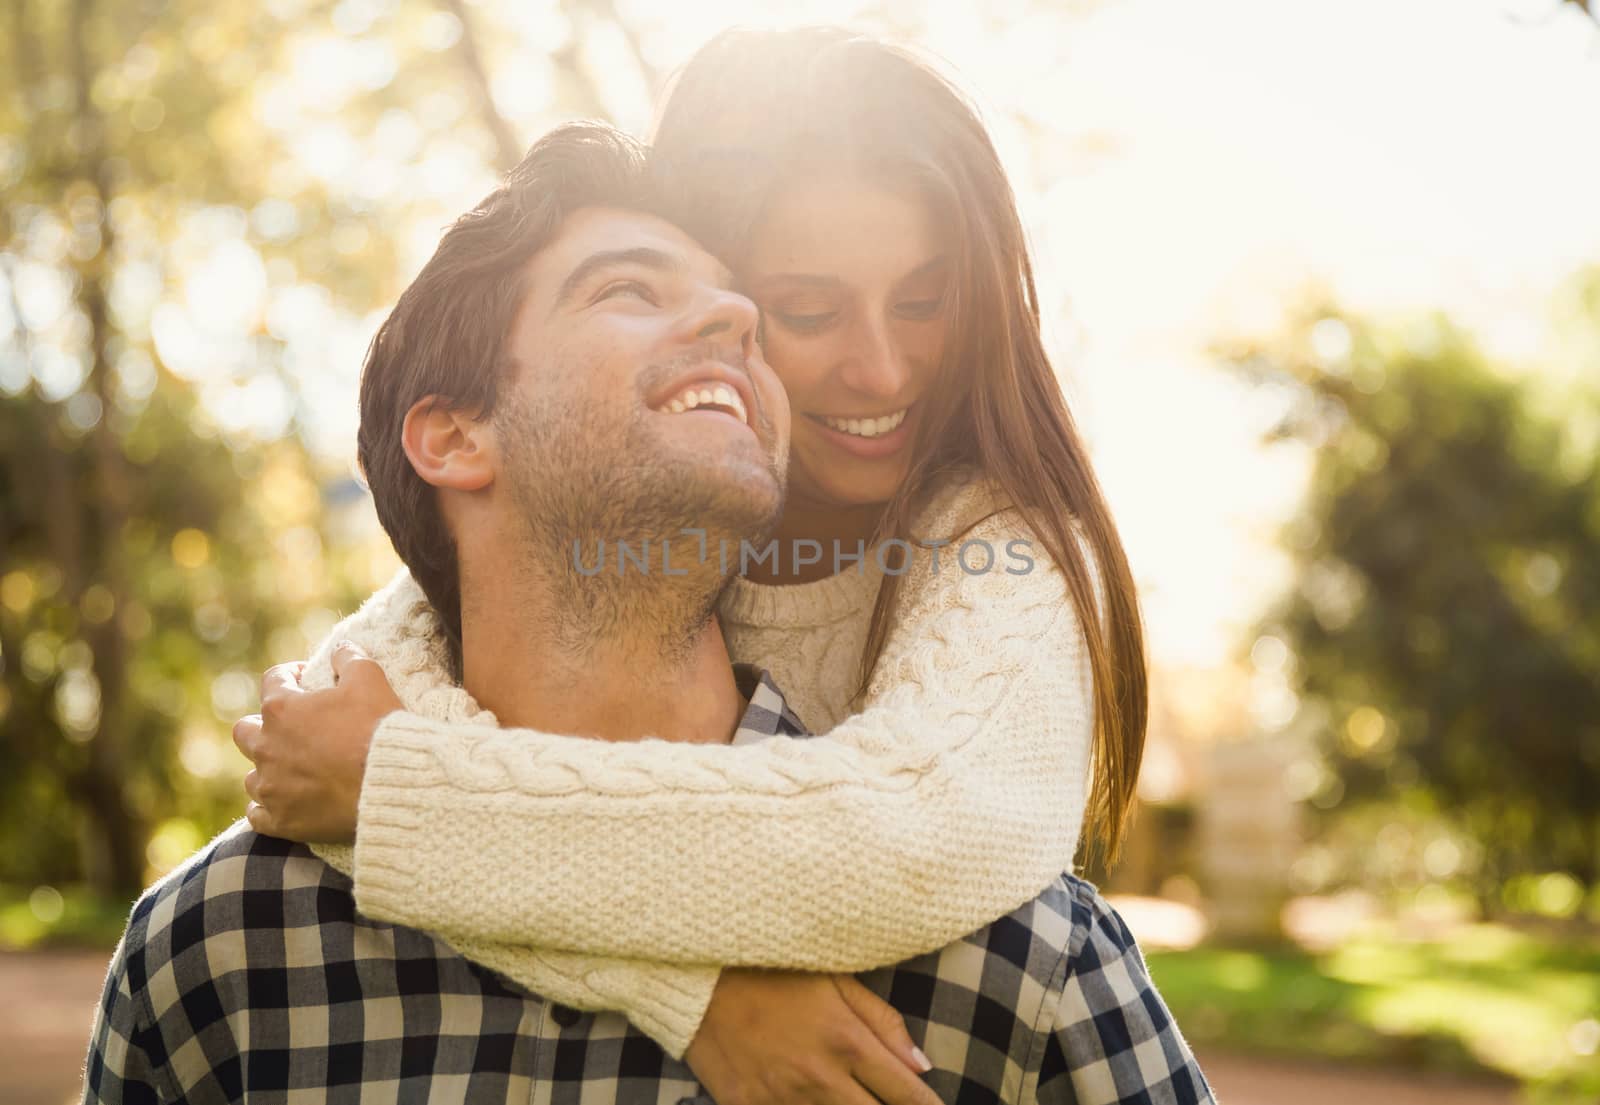 Beautiful couple in the park smiling